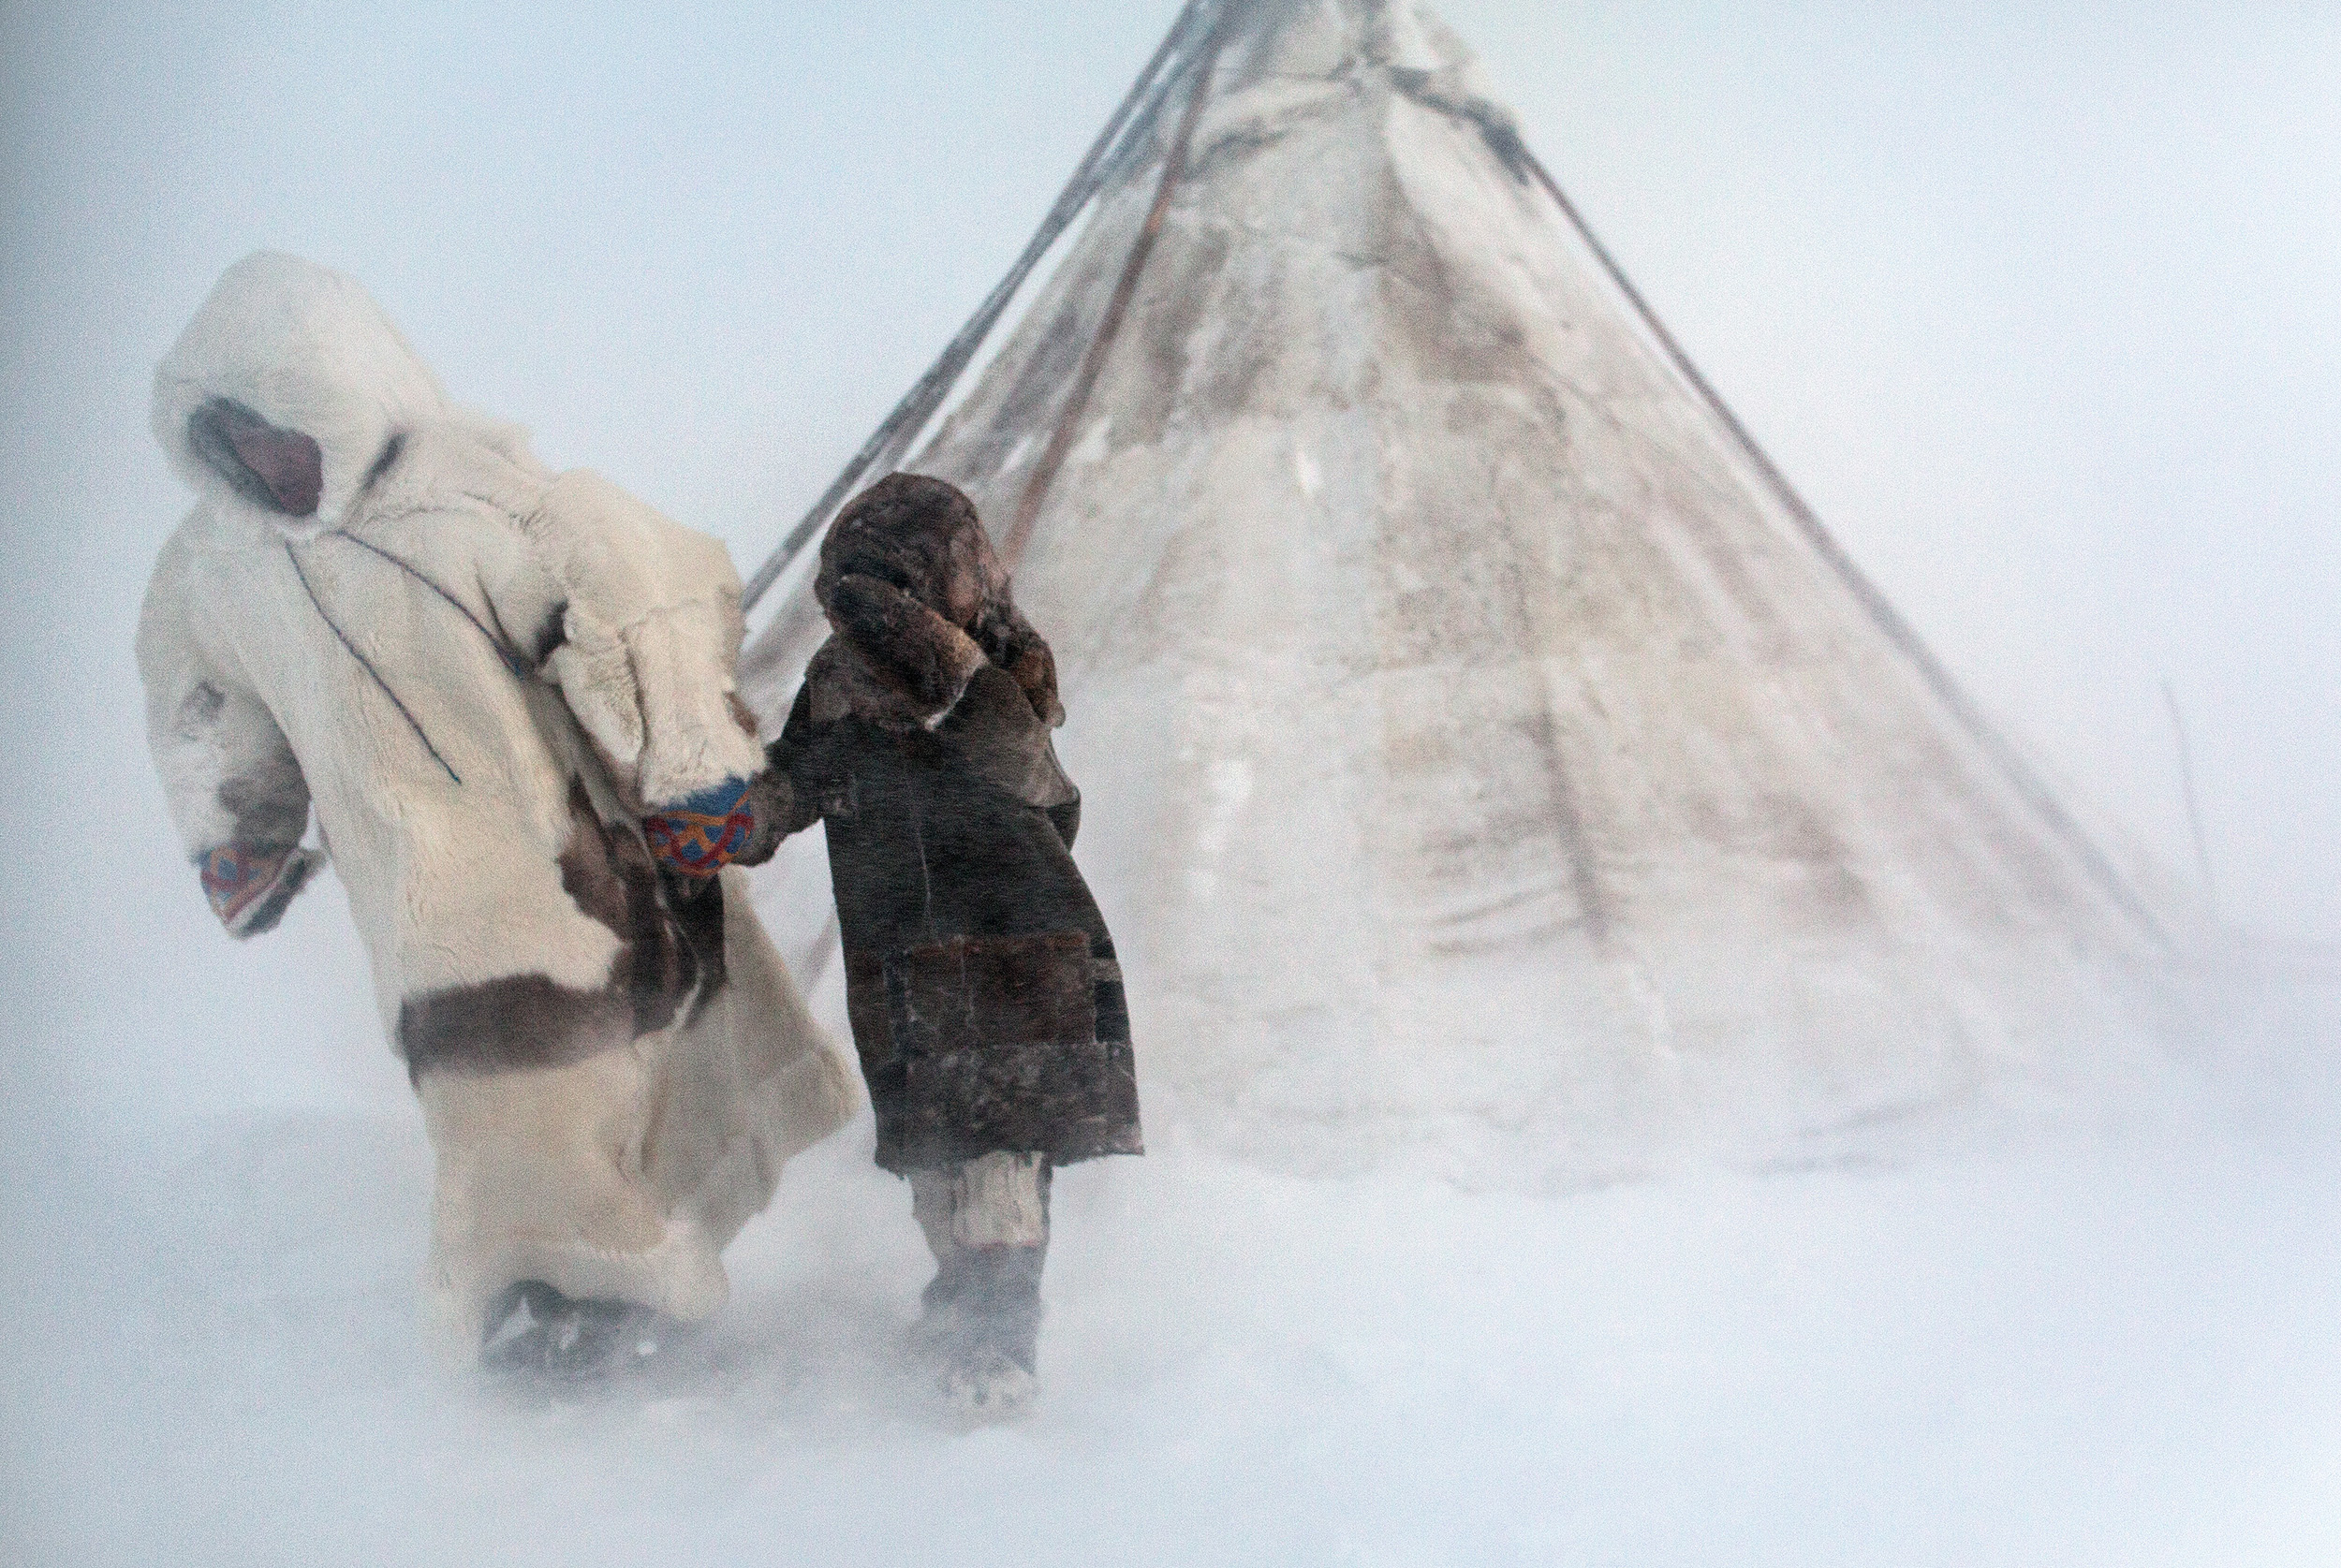 One of the toughest place on Earth, in the Yamal Peninsula lives the Nenets, the Siberian reindeer herders, under harsh winters at -50° and wind blowing at over 100km/h.